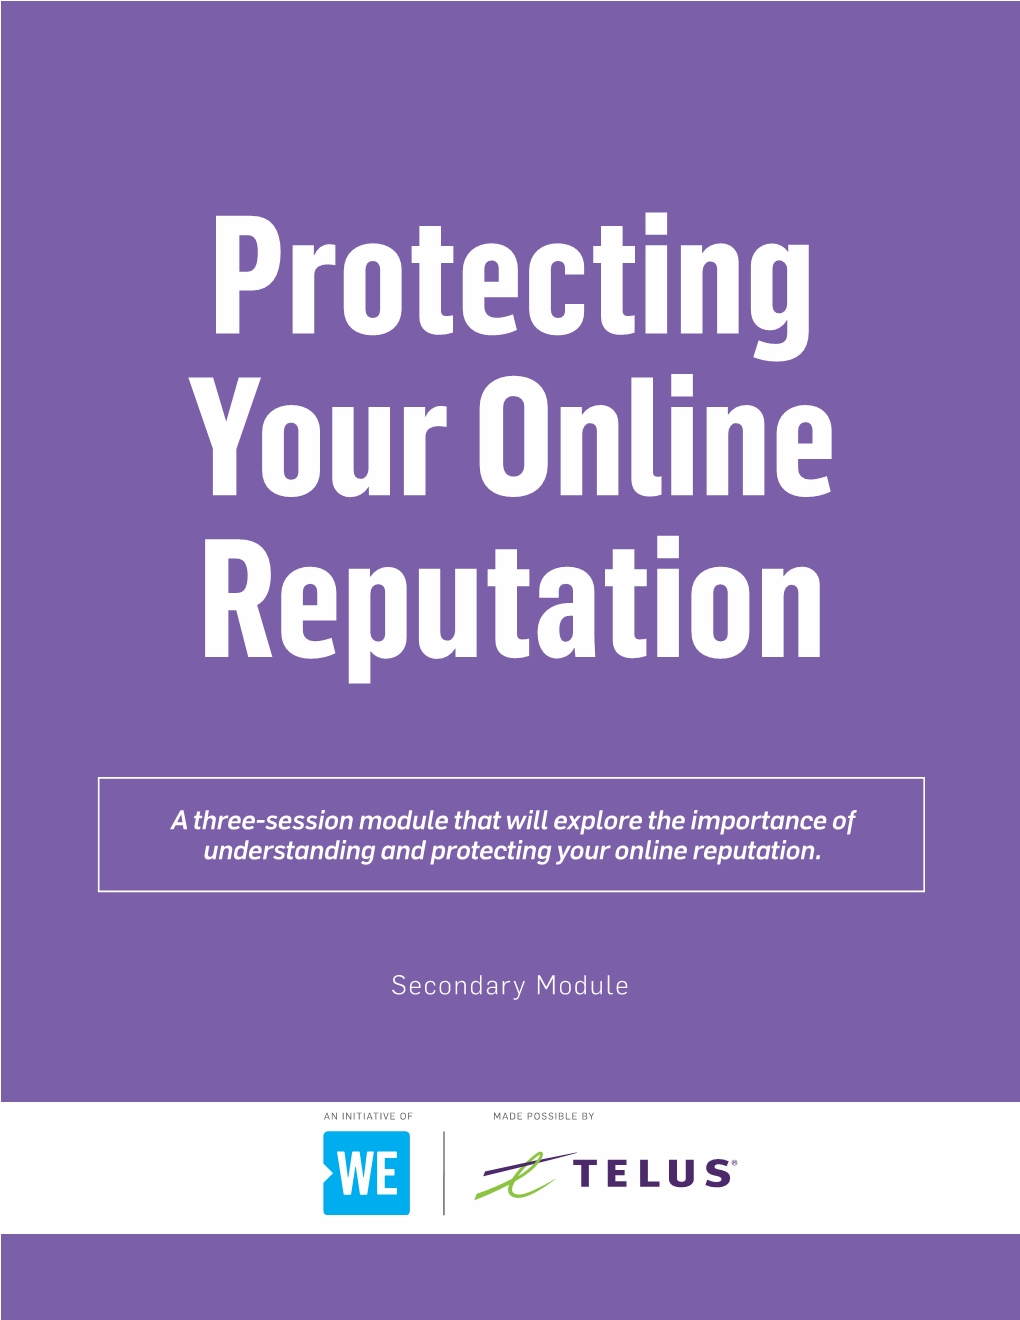 A Three-Session Module That Will Explore the Importance of Understanding and Protecting Your Online Reputation